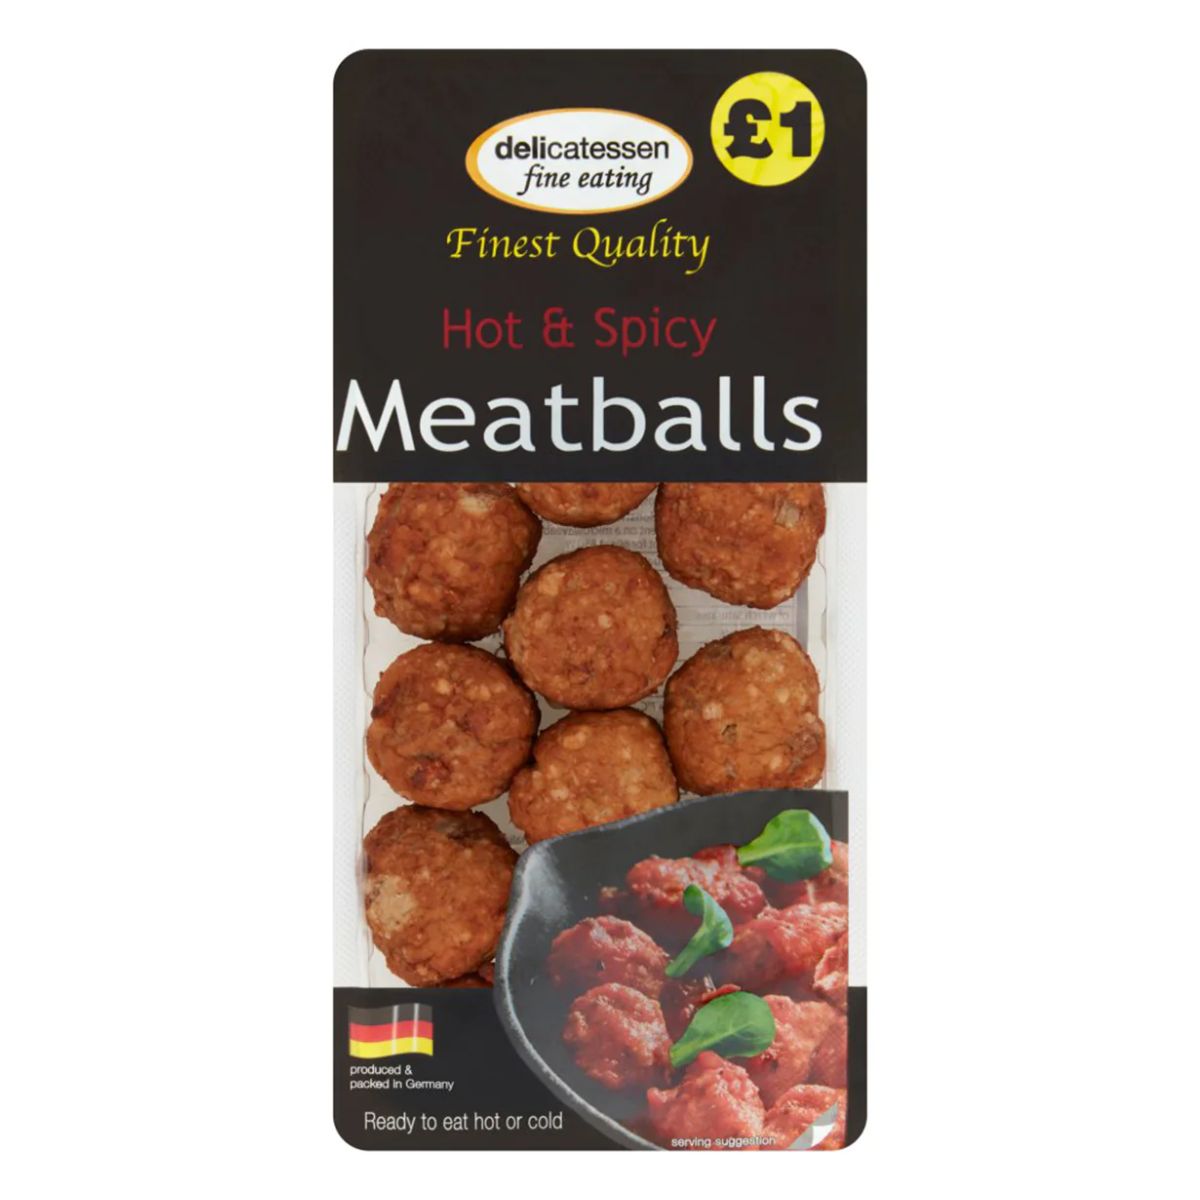 Packaging for Delicatessen - Hot & Spicy Meatballs - 200g, priced at £1, with an indication they are ready to eat hot or cold.